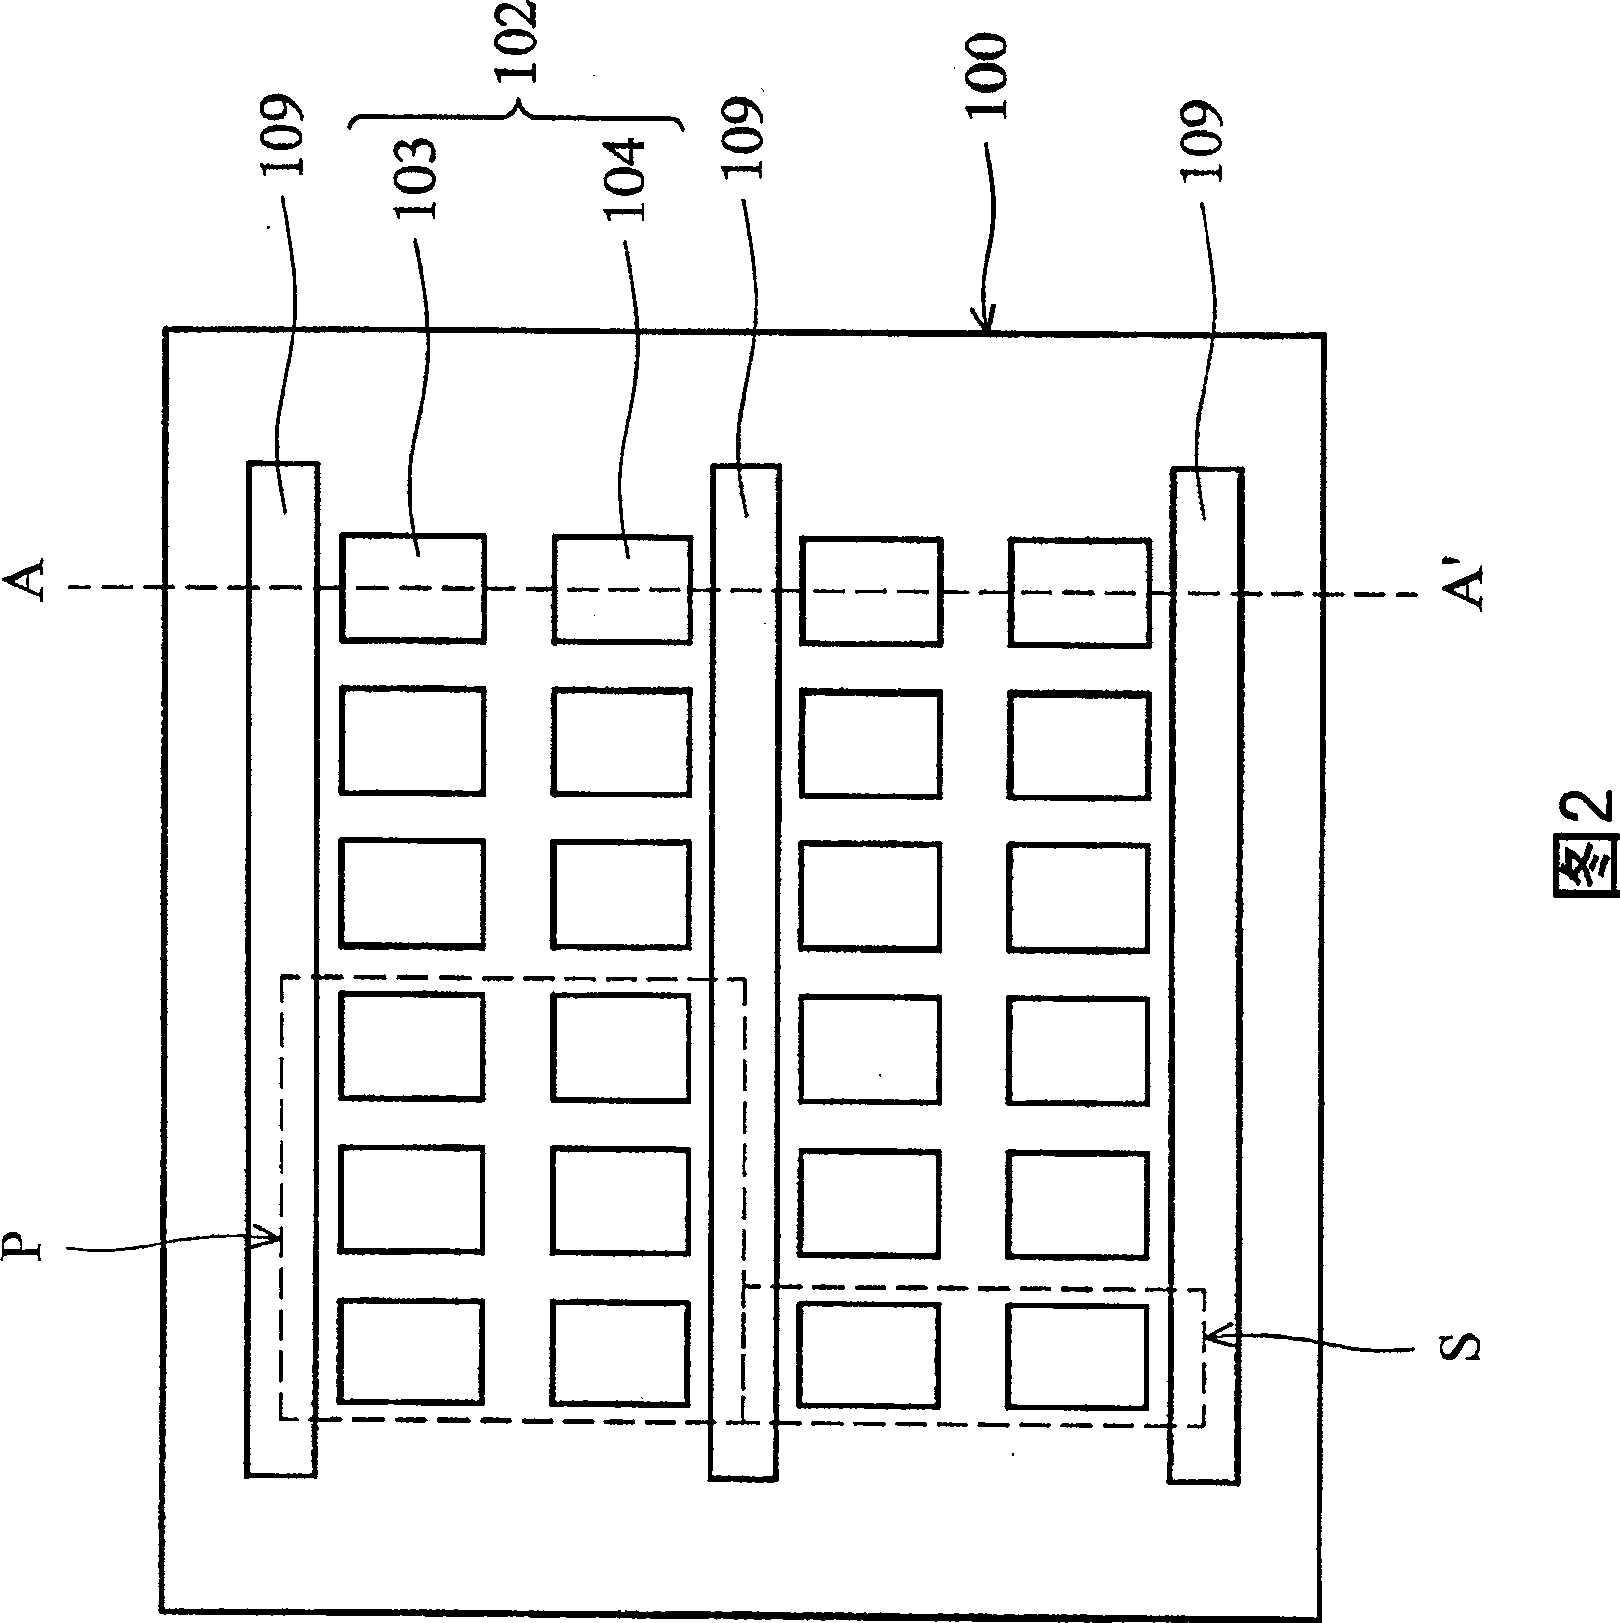 Double-side organic luminescence display device and its making method